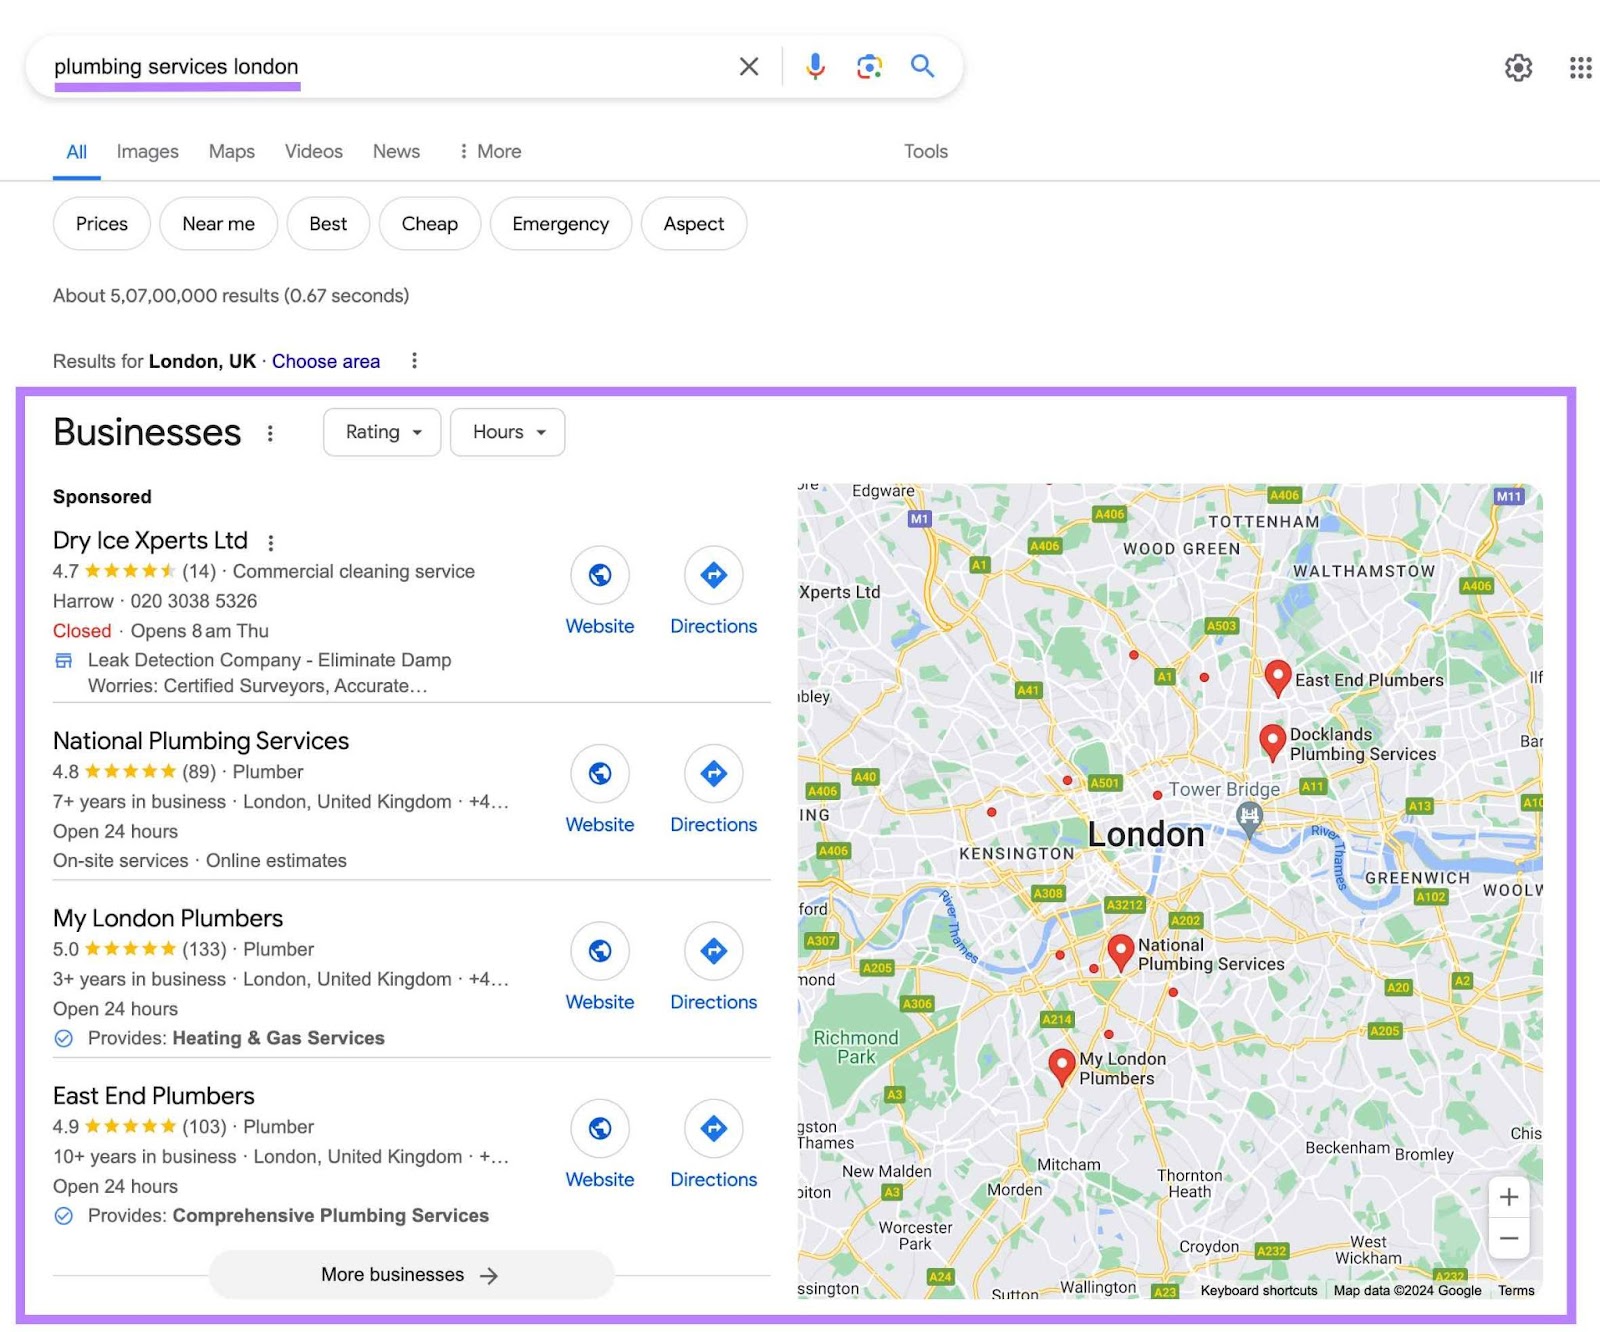 Google hunt  results for "plumbing services london" showing the section  battalion  with businesses.